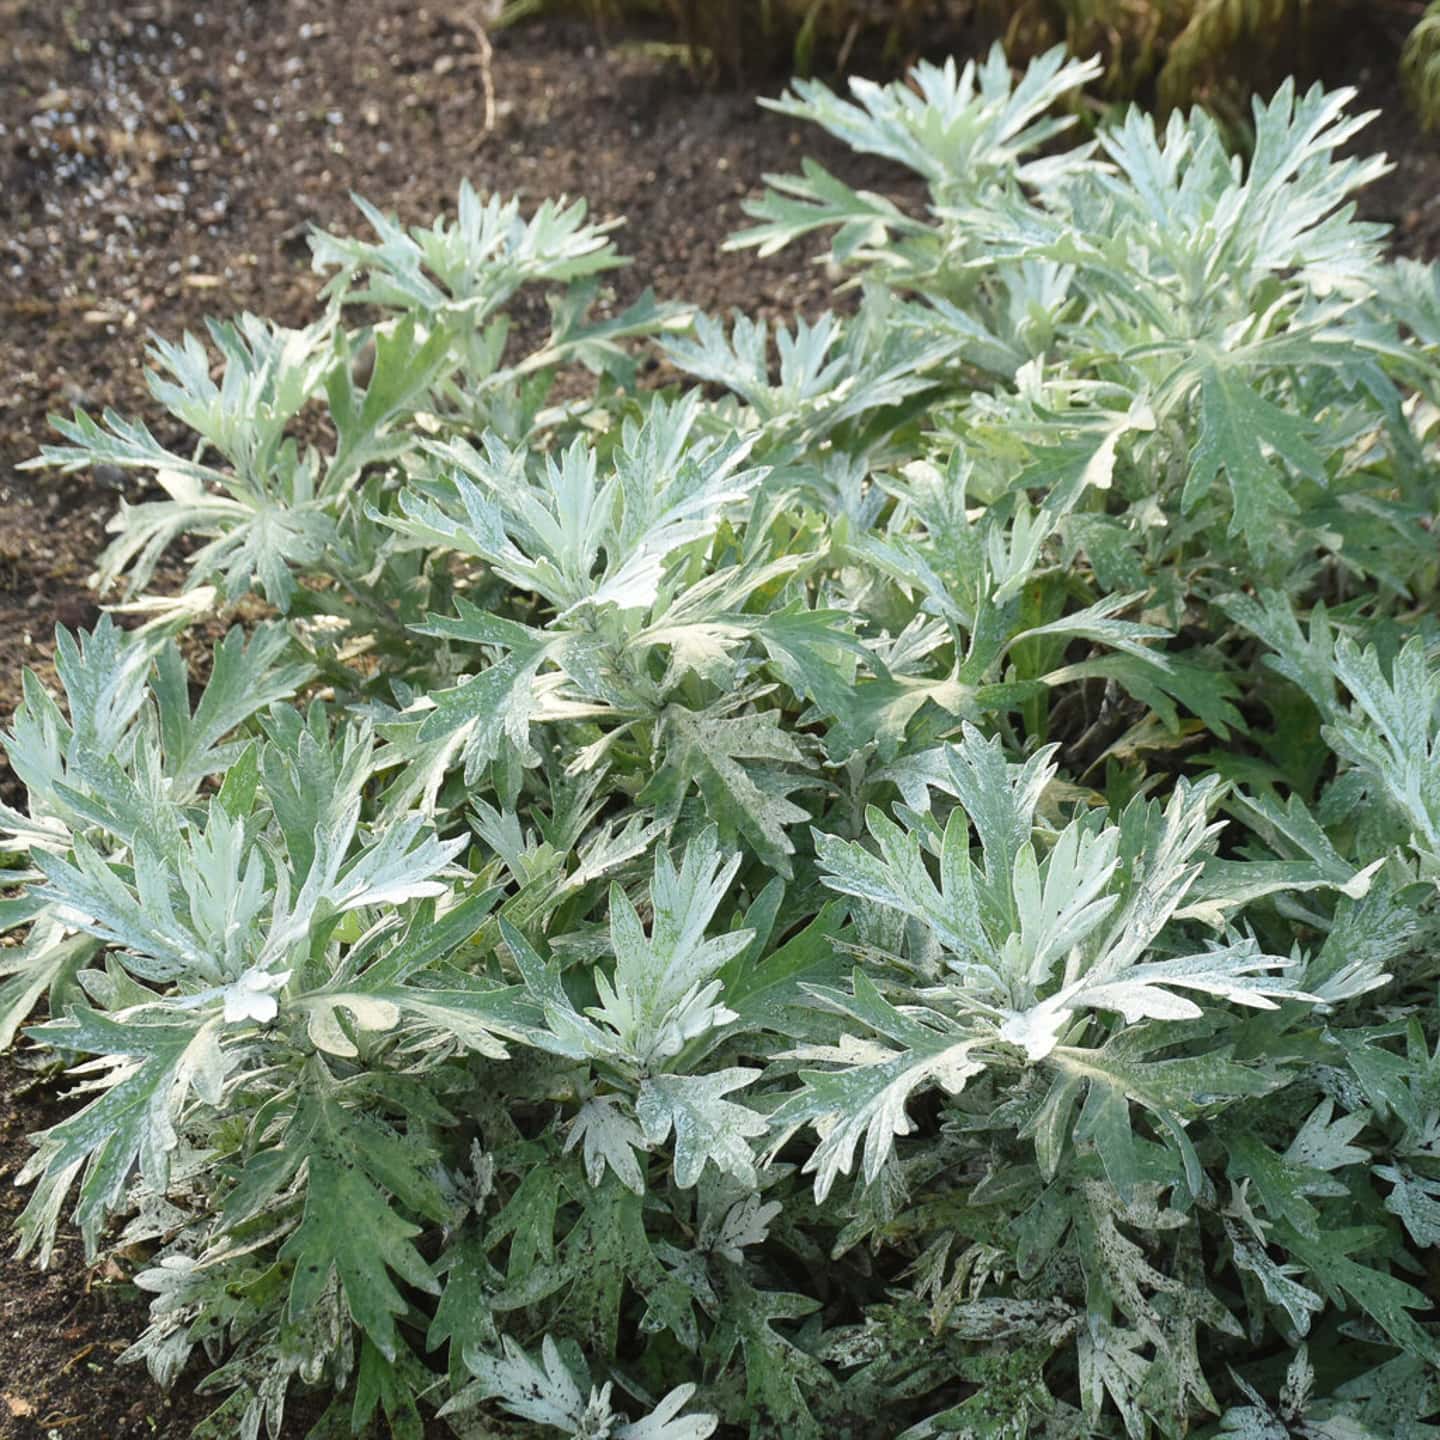 Close up of Artemisia 'Silver Lining' leaves